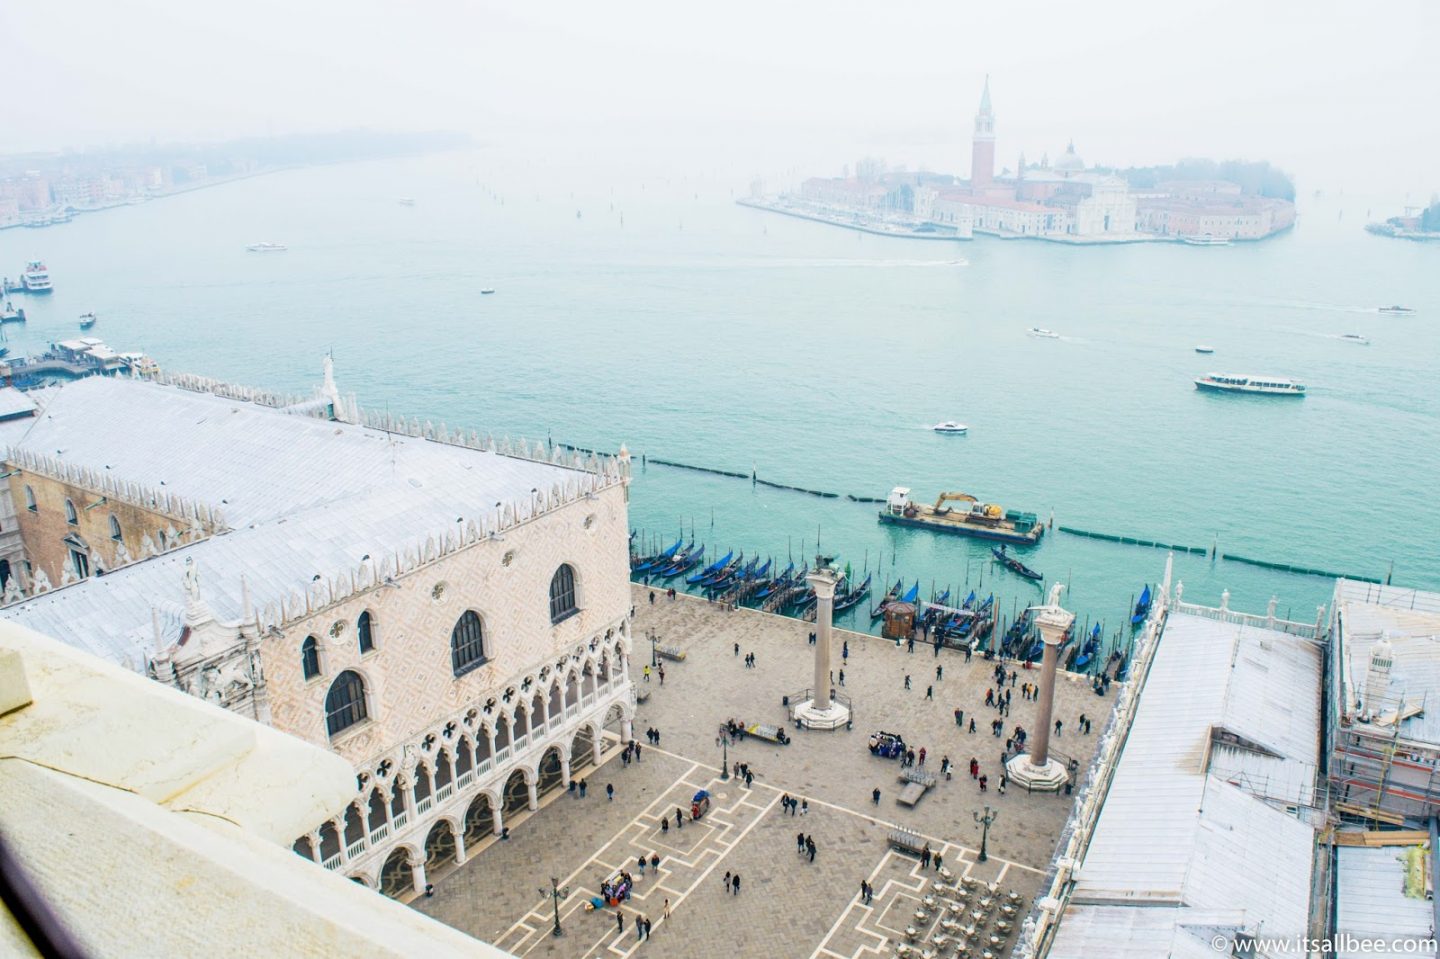 best places in venice | the best place in venice | best places venice | venice best spots | places in venice rooftops of venice